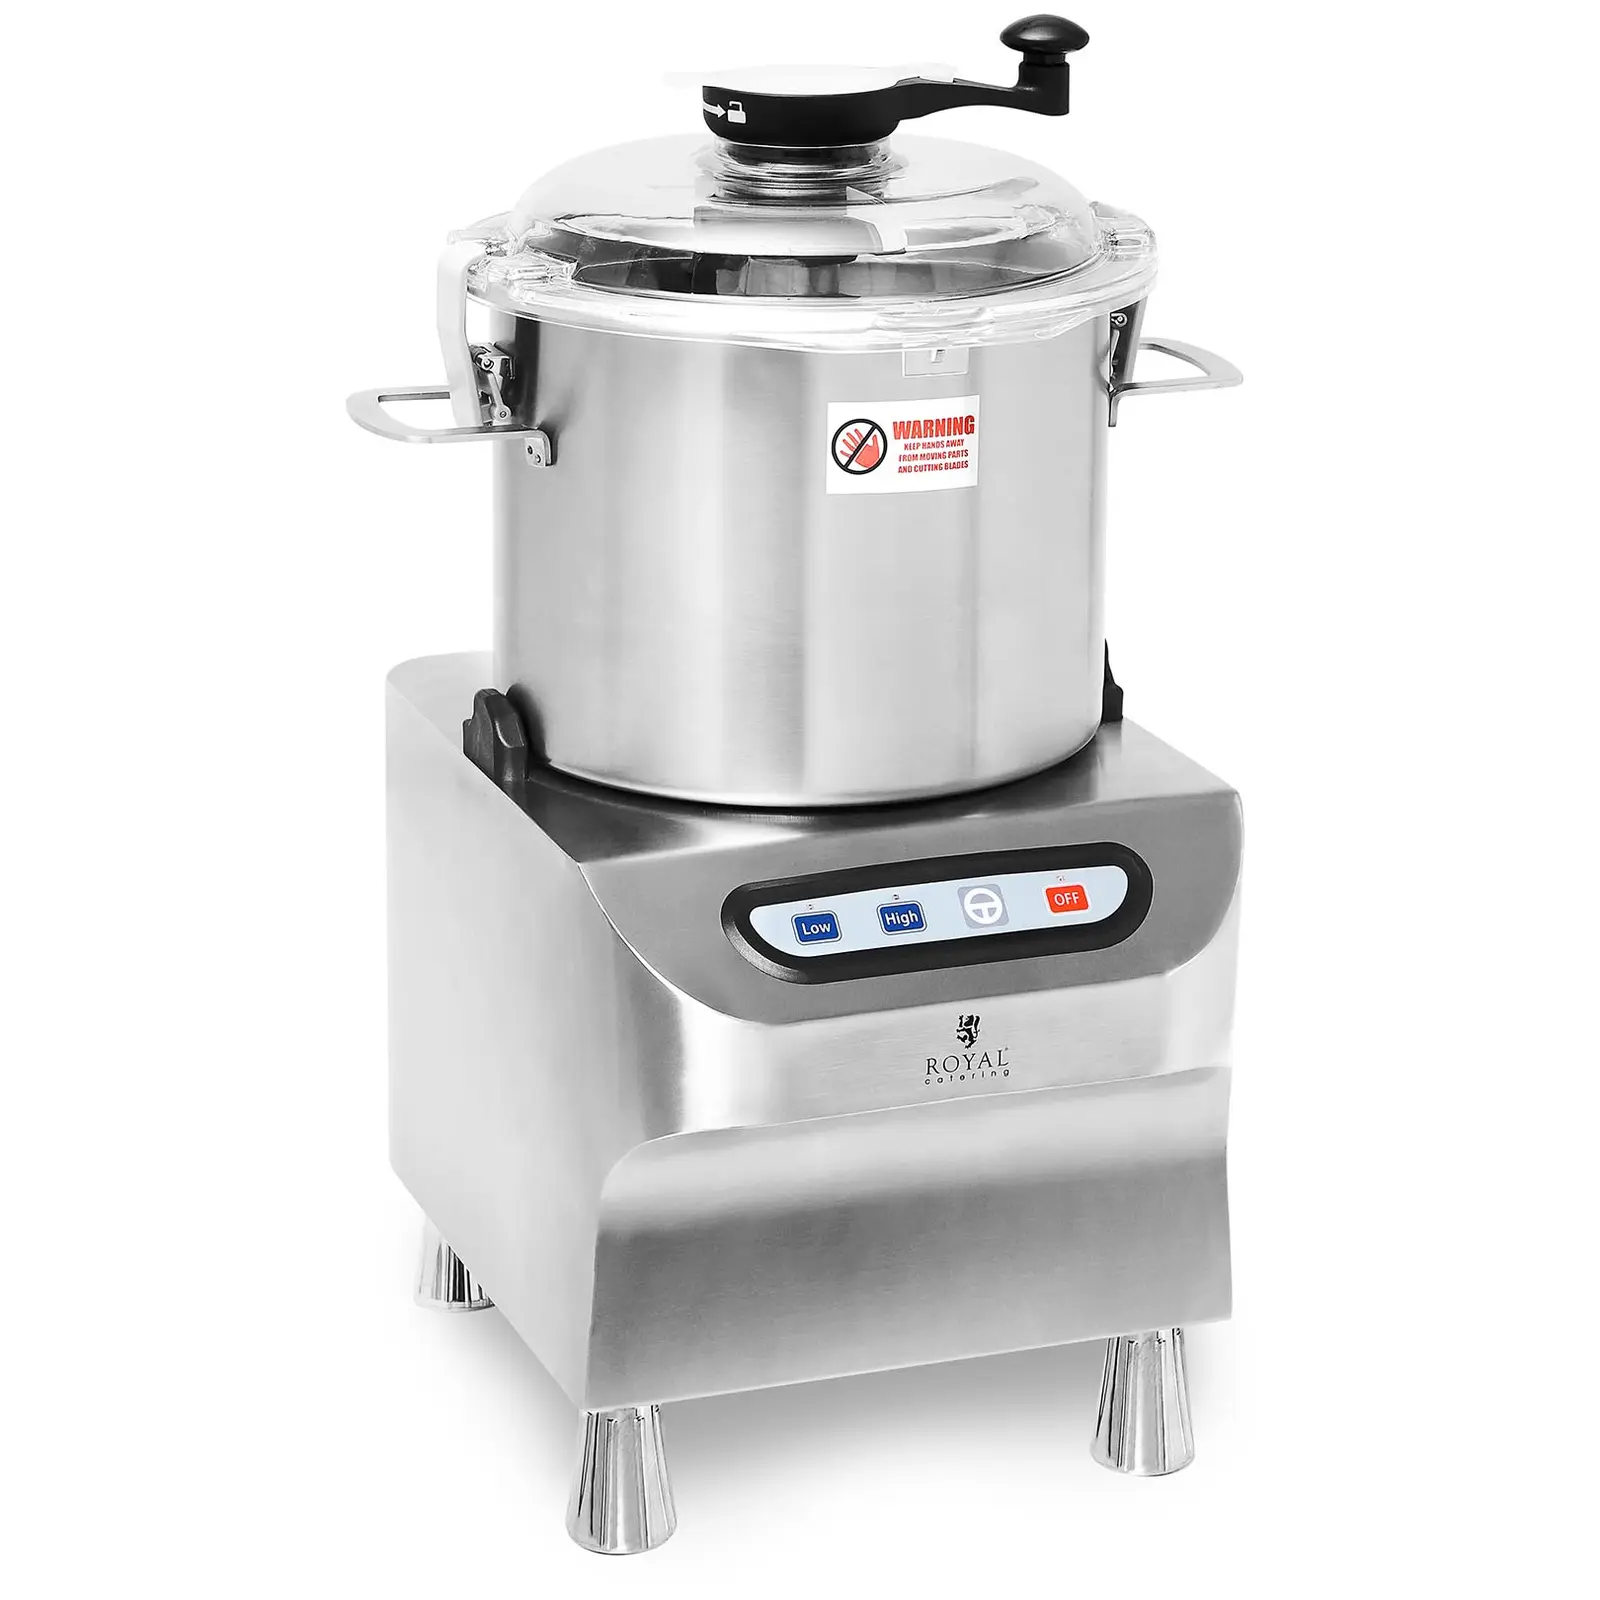 Occasion Cutter cuisine - 1500/2200 tr/min - Royal Catering - 12 l